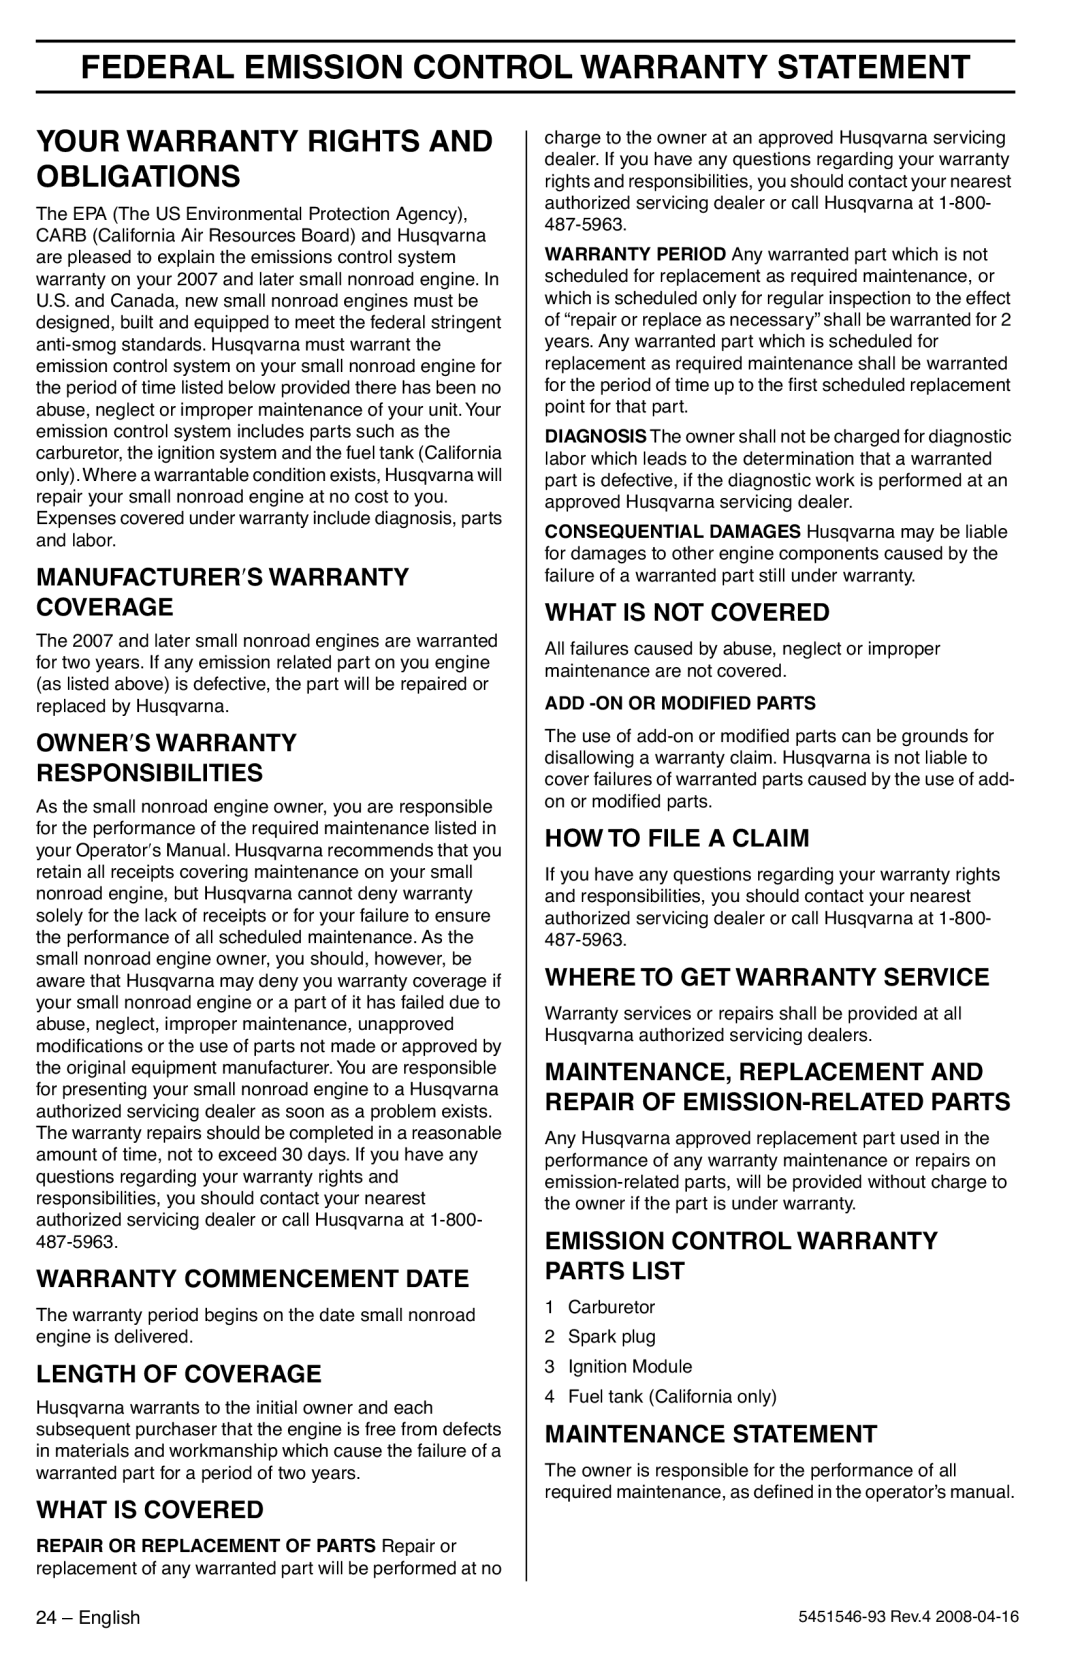 Husqvarna 240, 235 Federal Emission Control Warranty Statement, Your Warranty Rights And Obligations, Length Of Coverage 